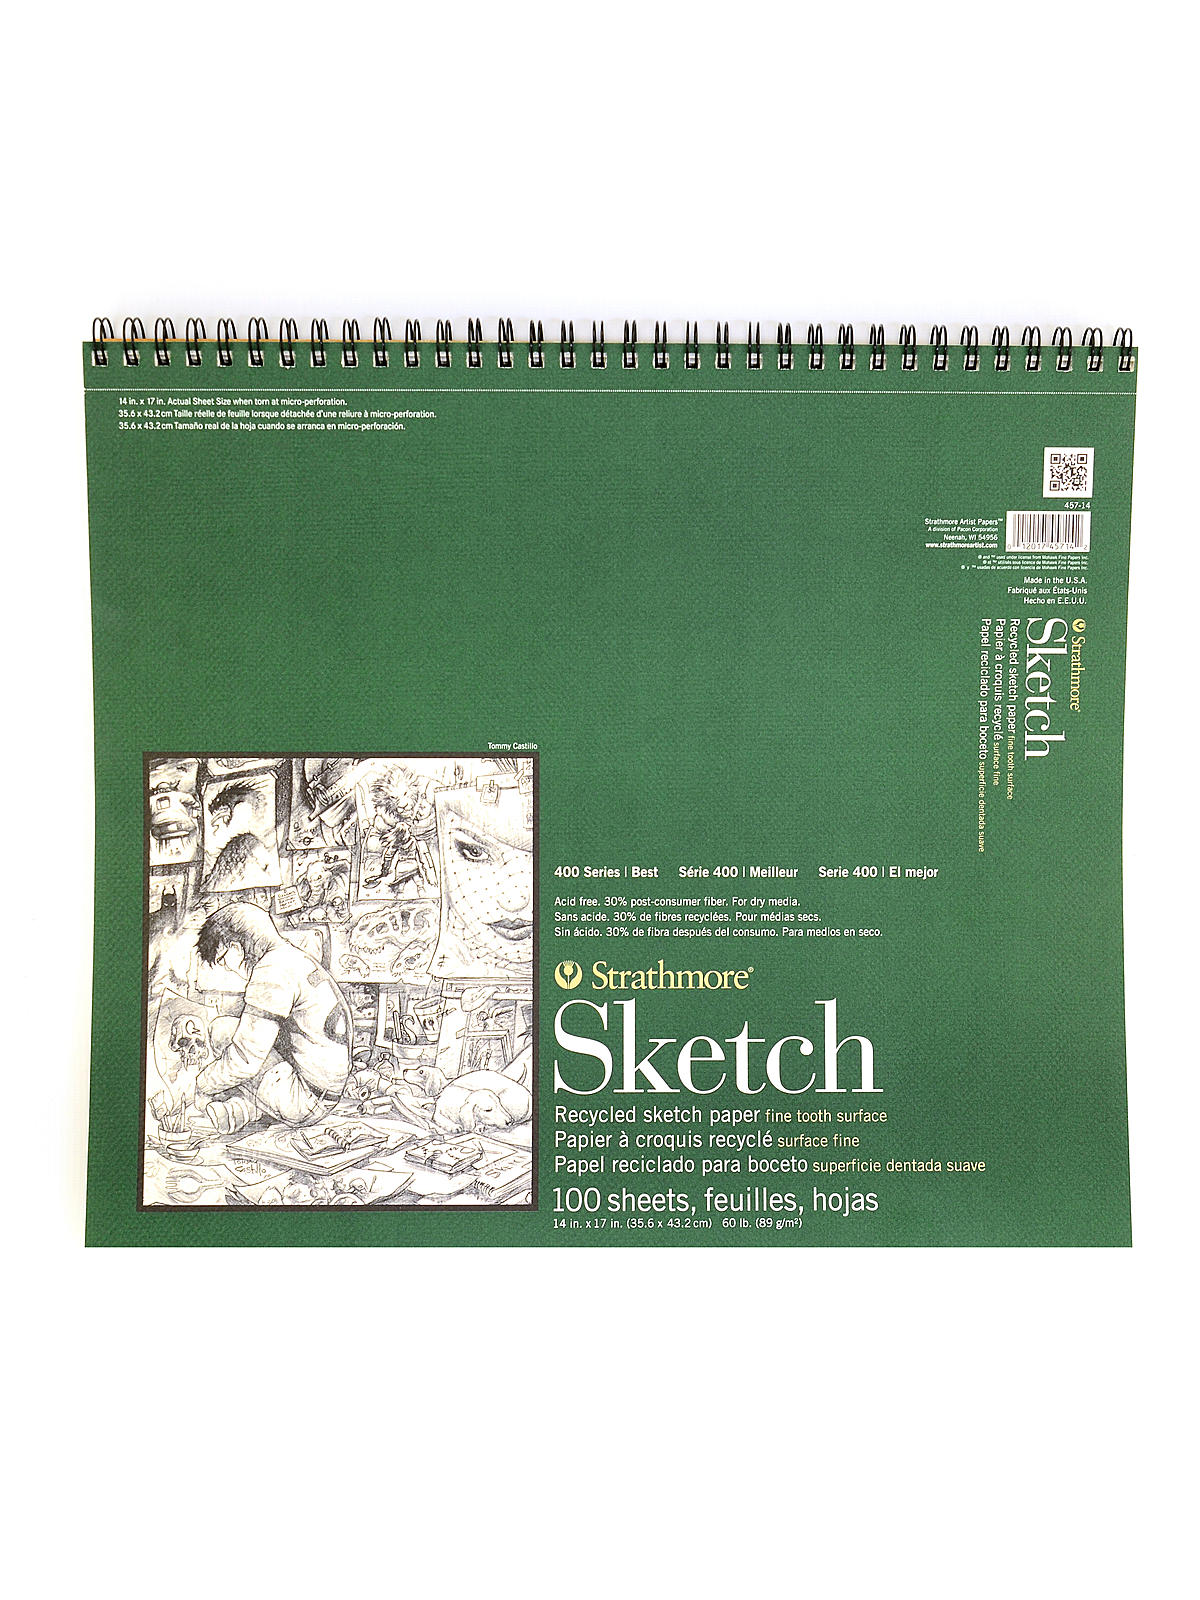 Series 400 Premium Recycled Sketch Pads 14 In. X 17 In. 100 Sheets